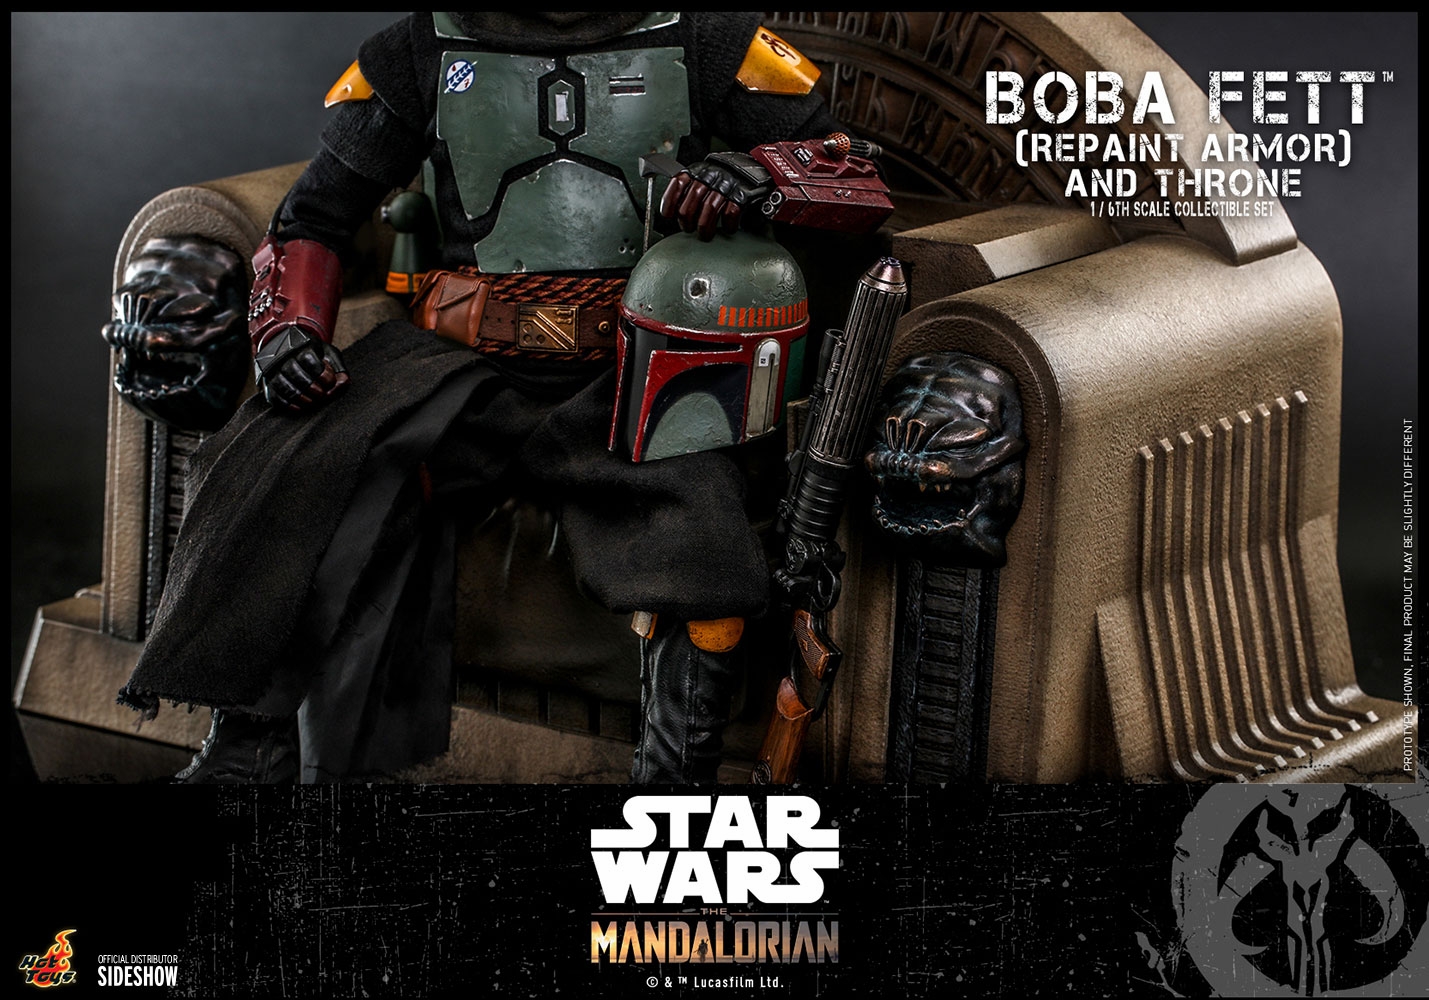 boba-fett-repaint-armor-special-edition-and-throne_star-wars_gallery_60ee529ea2070.jpg